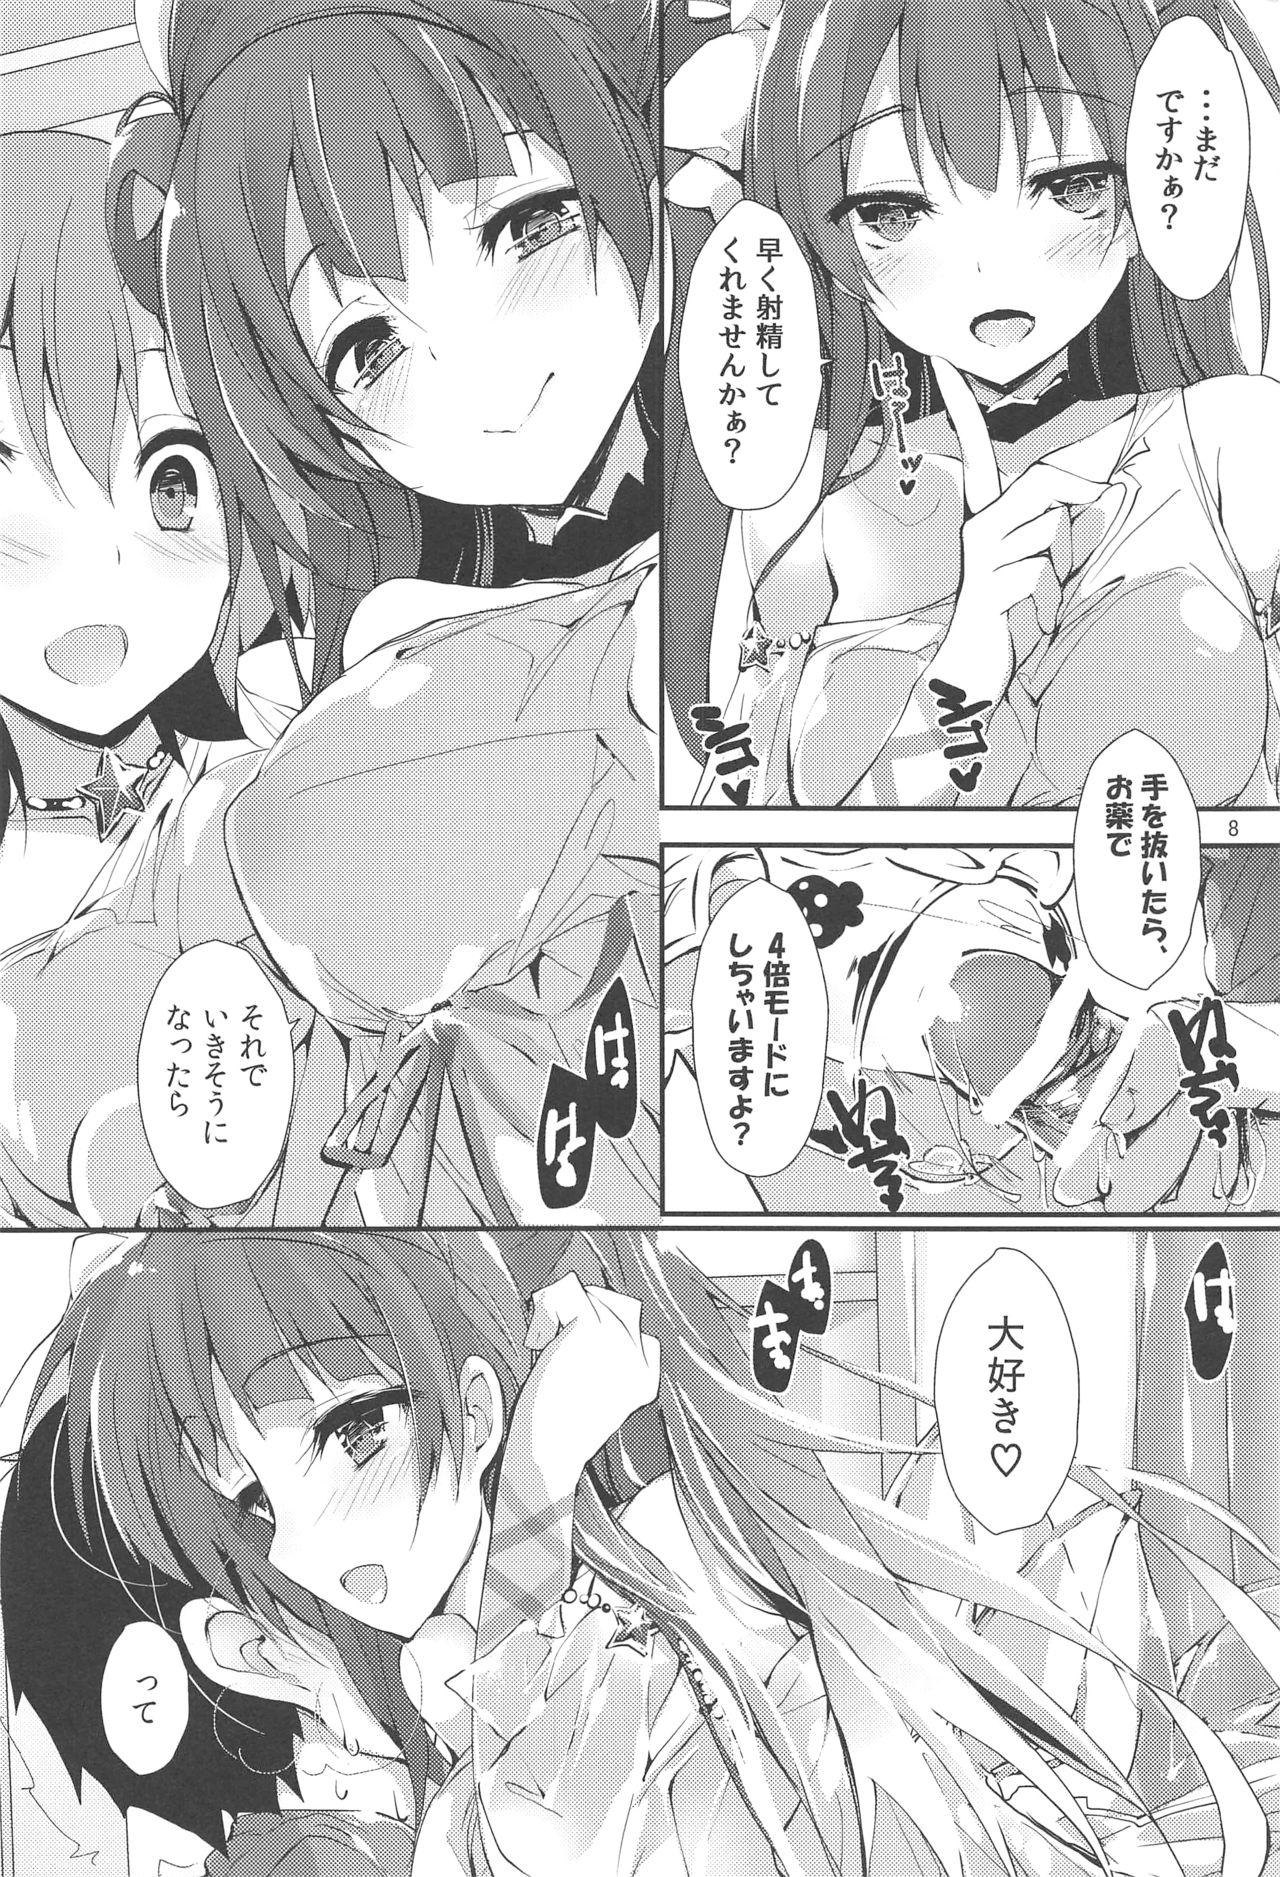 Mofos ENDLESS TRADE - Love live Girlfriend - Page 7